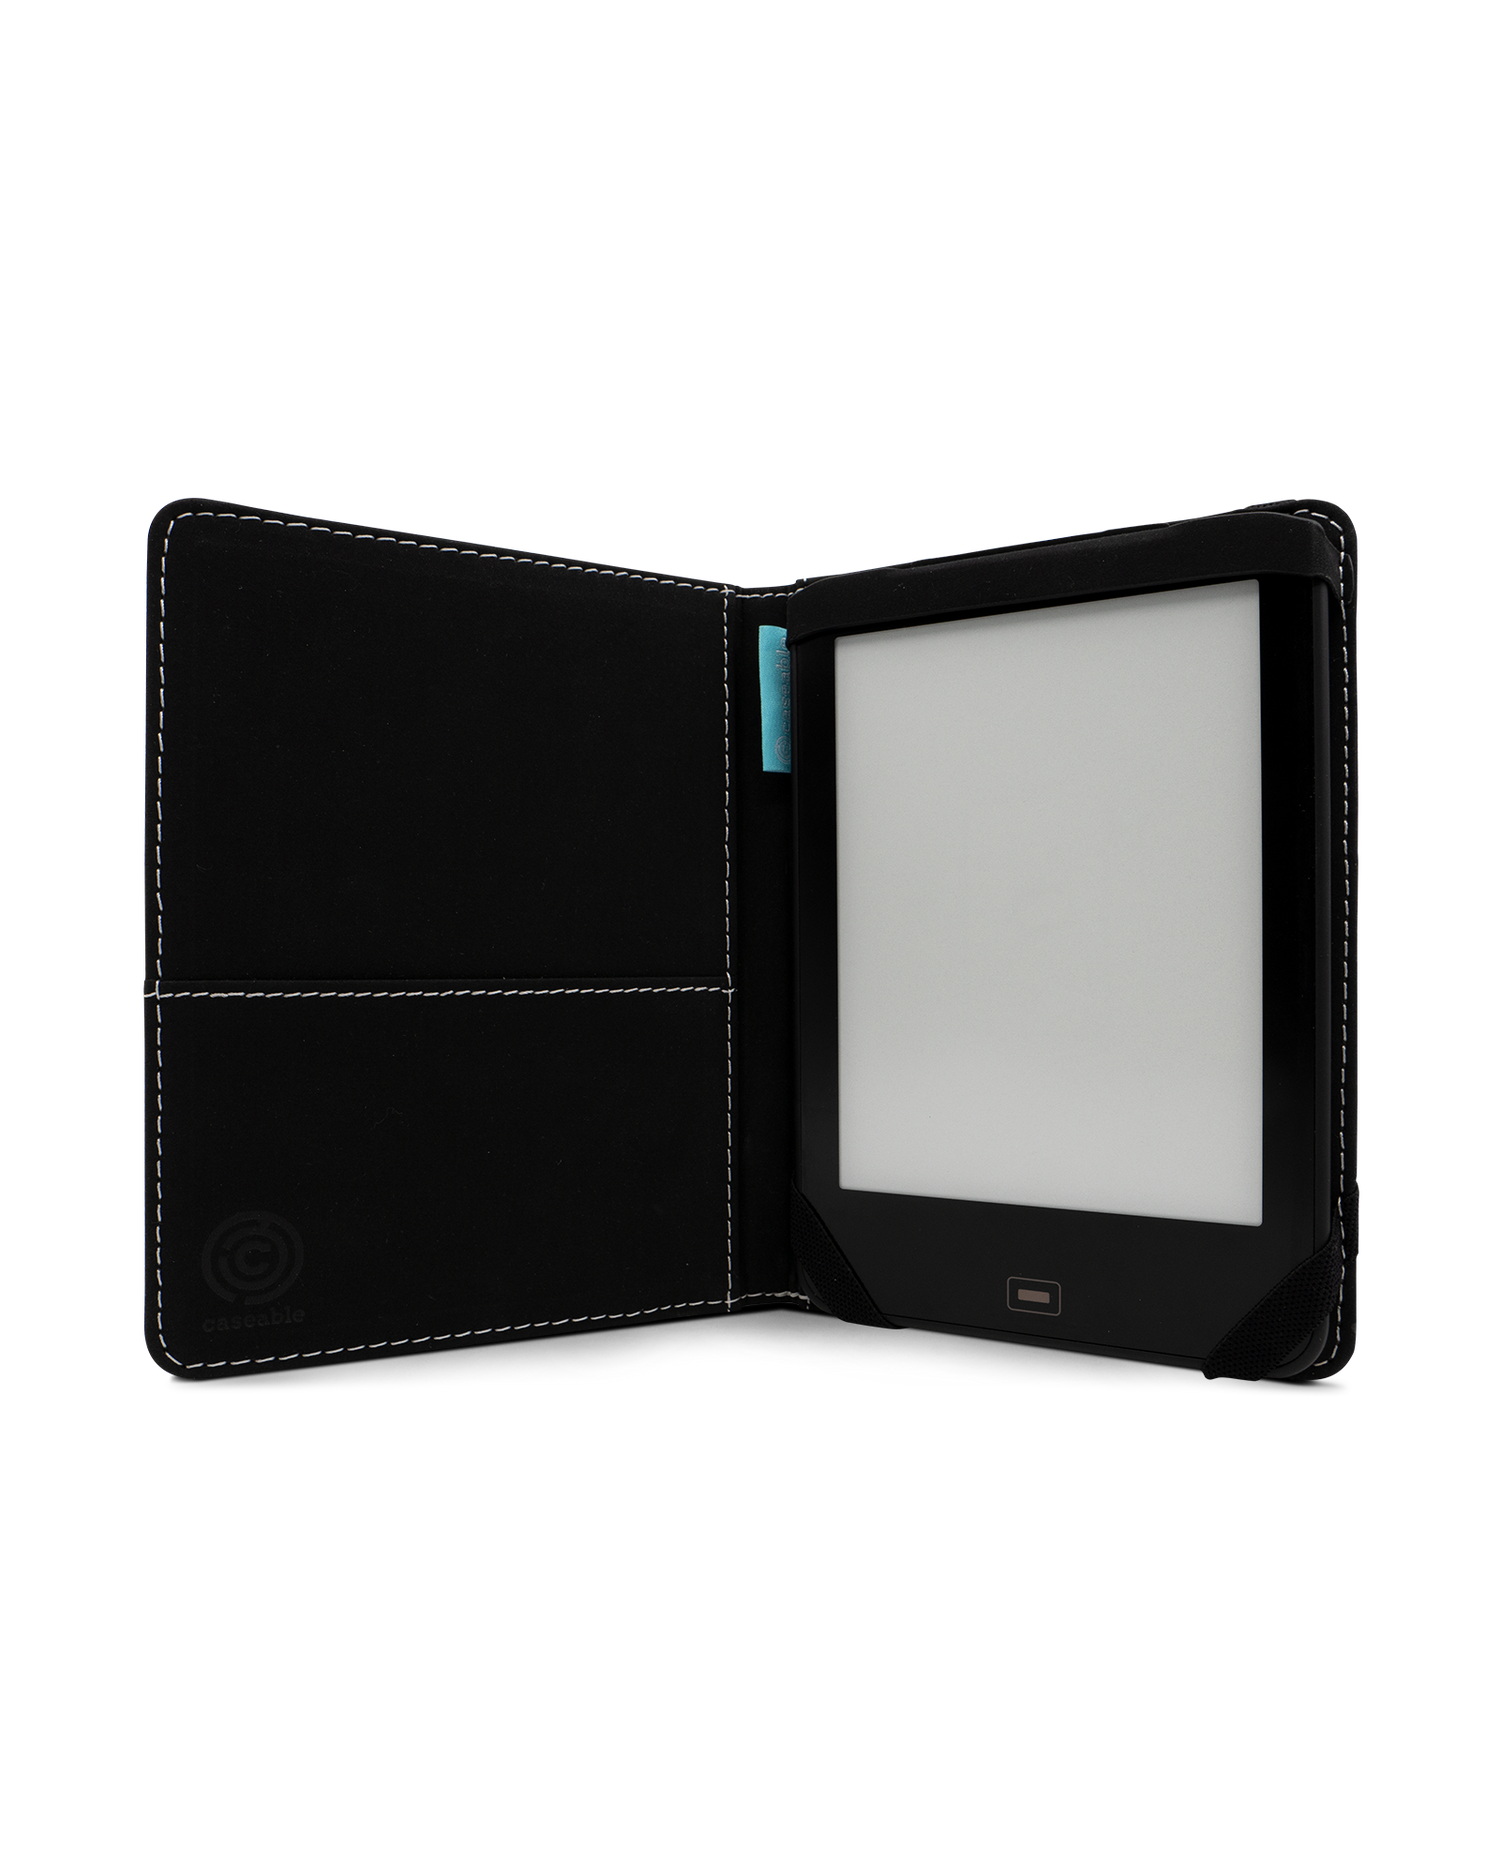 Classy Sassy eReader Case for tolino vision 1 to 4 HD: Opened interior view